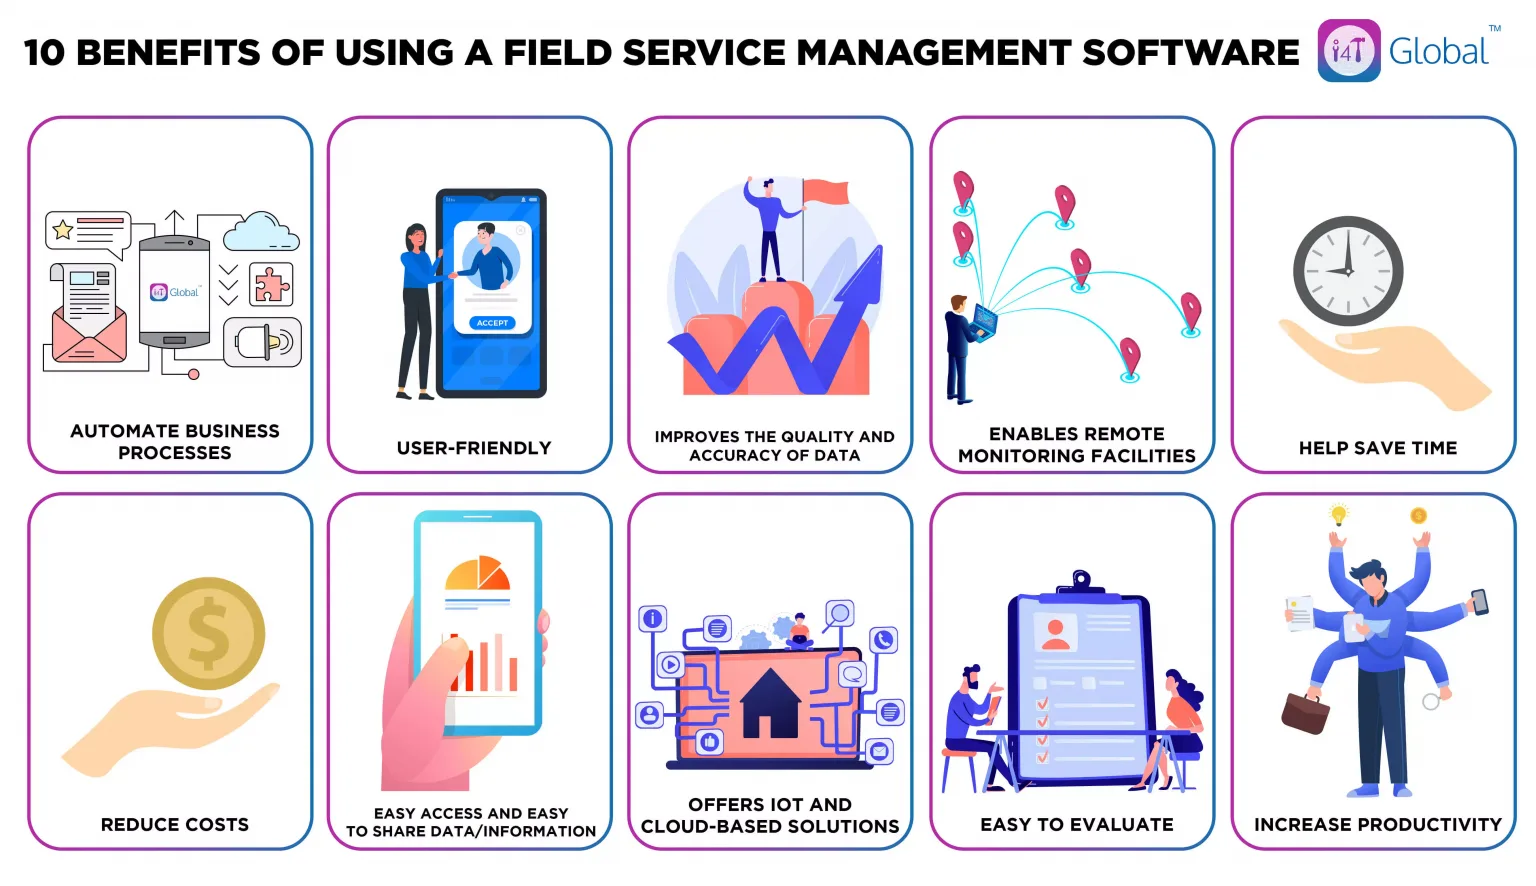 Benefits of using field service management software - i4T Global